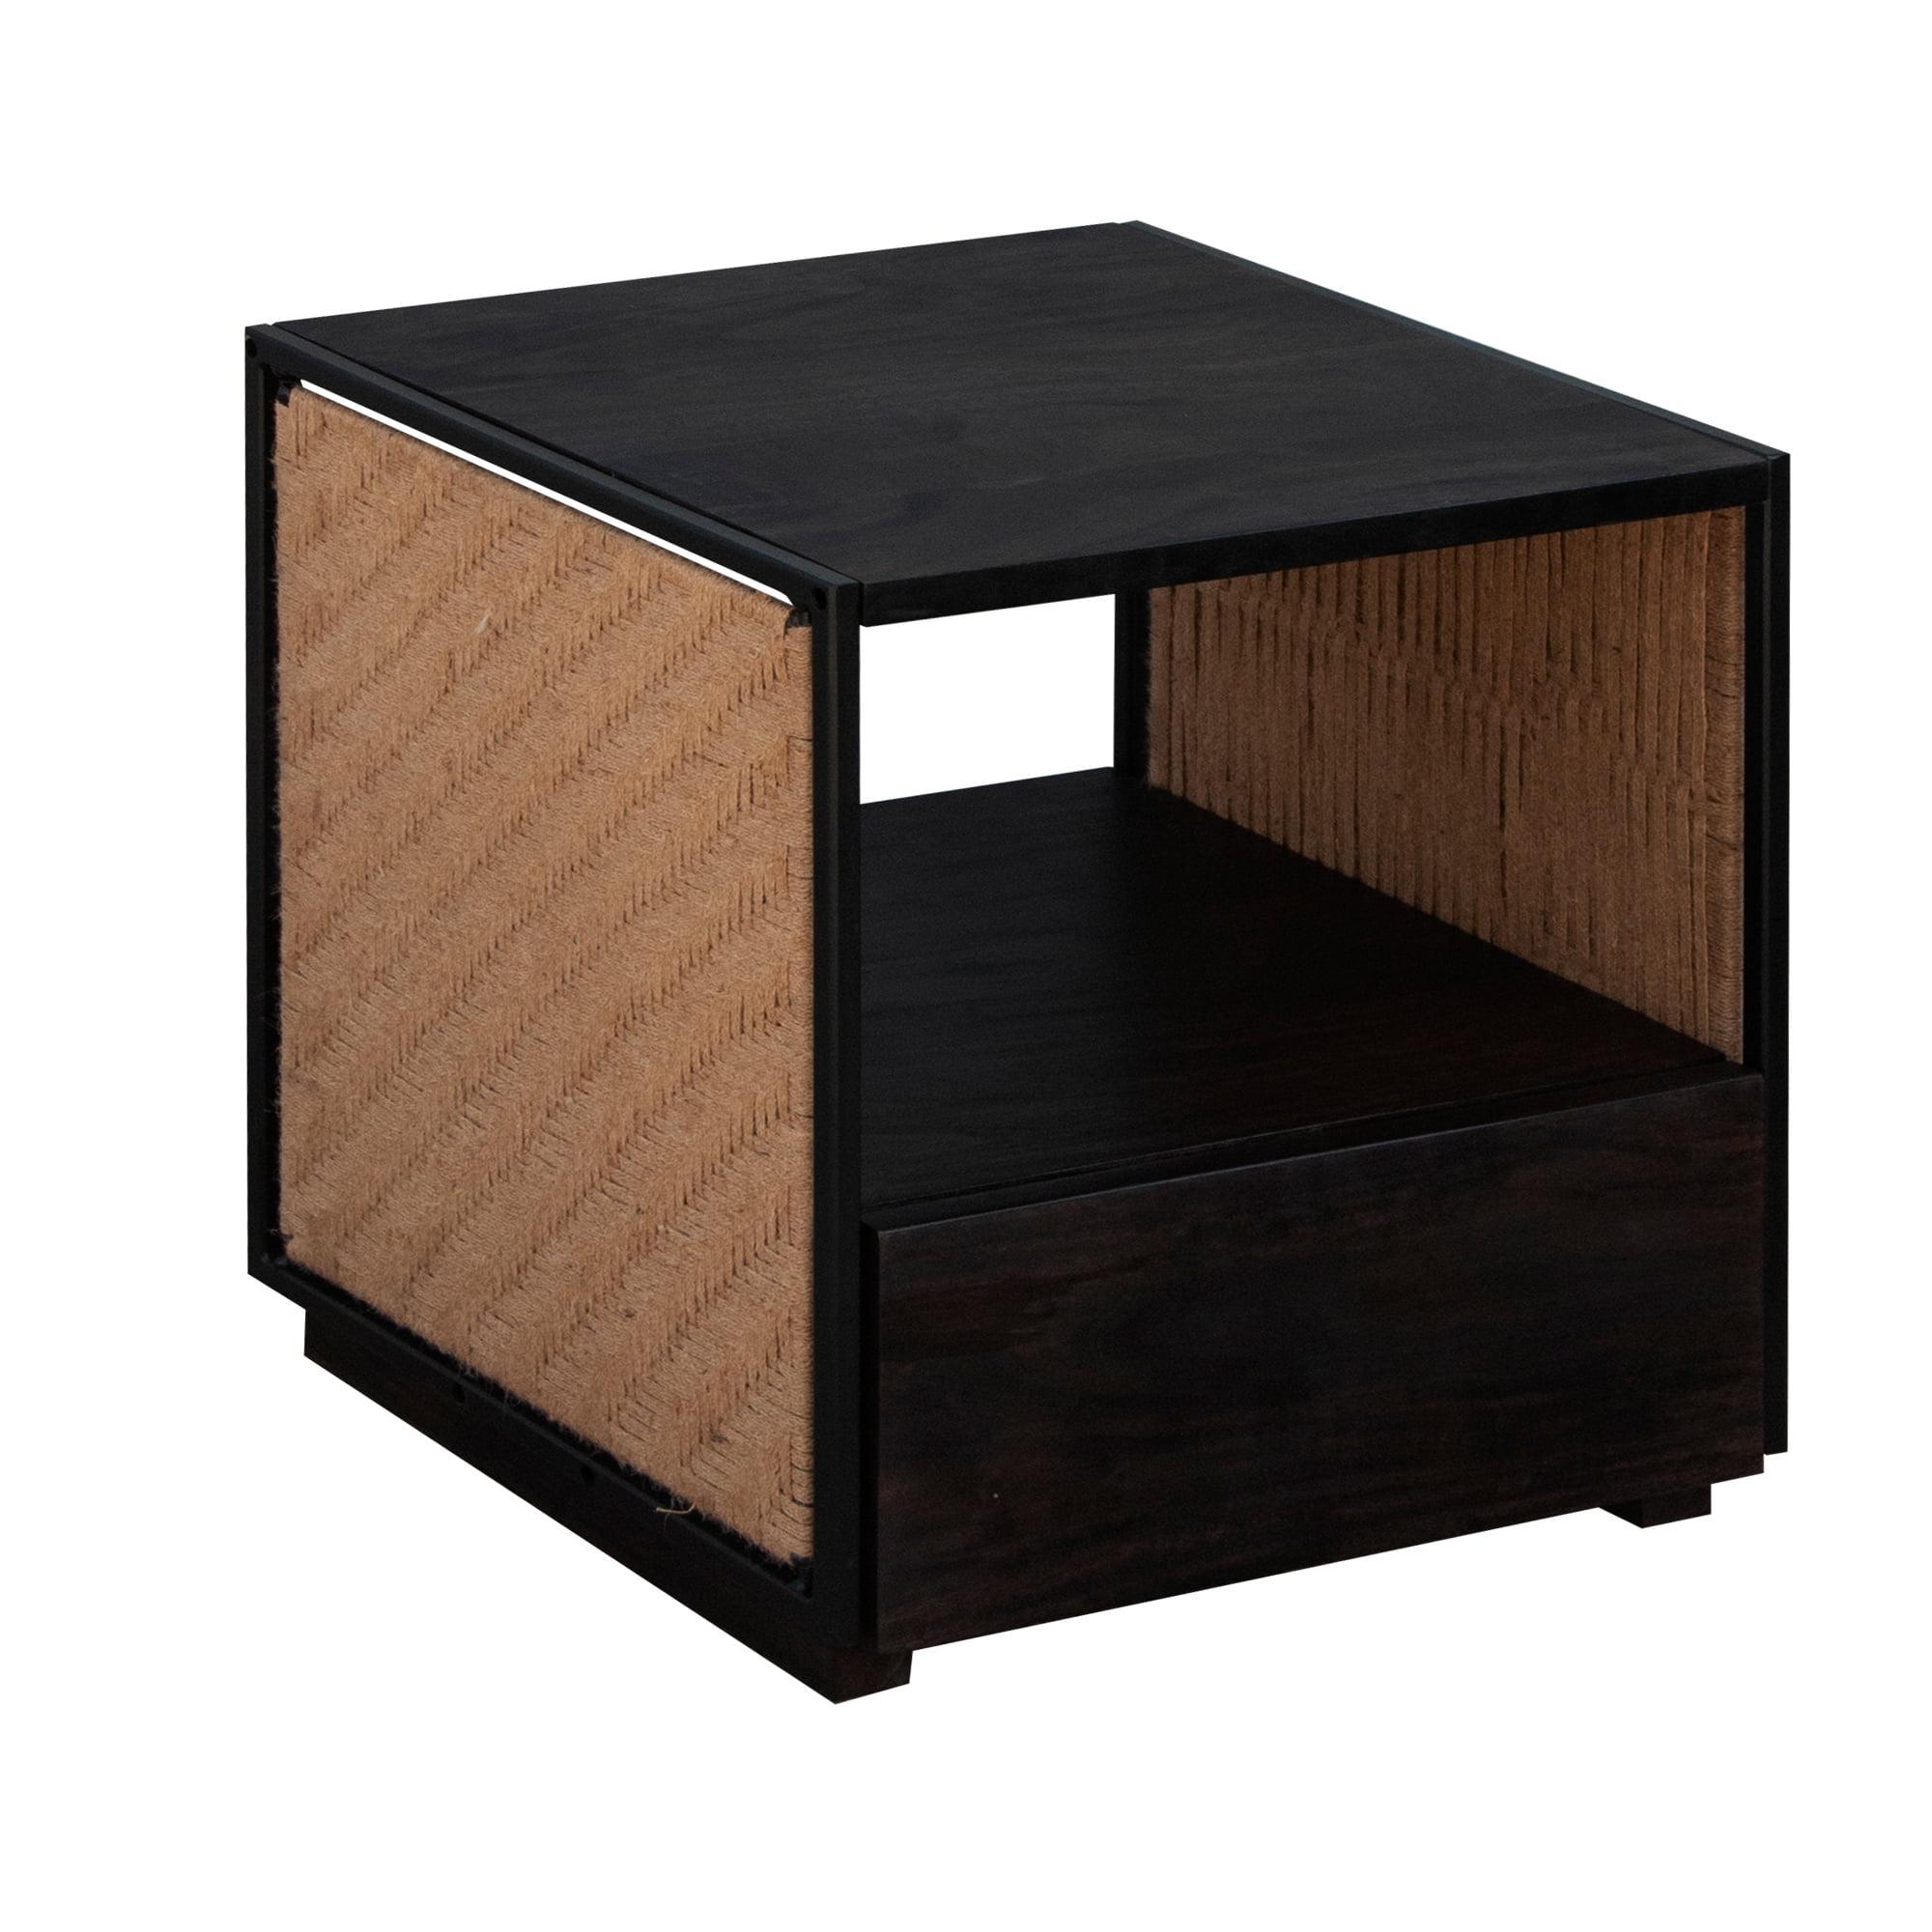 Cottage Charm Acacia Wood & Woven Jute Nightstand - Brown/Black